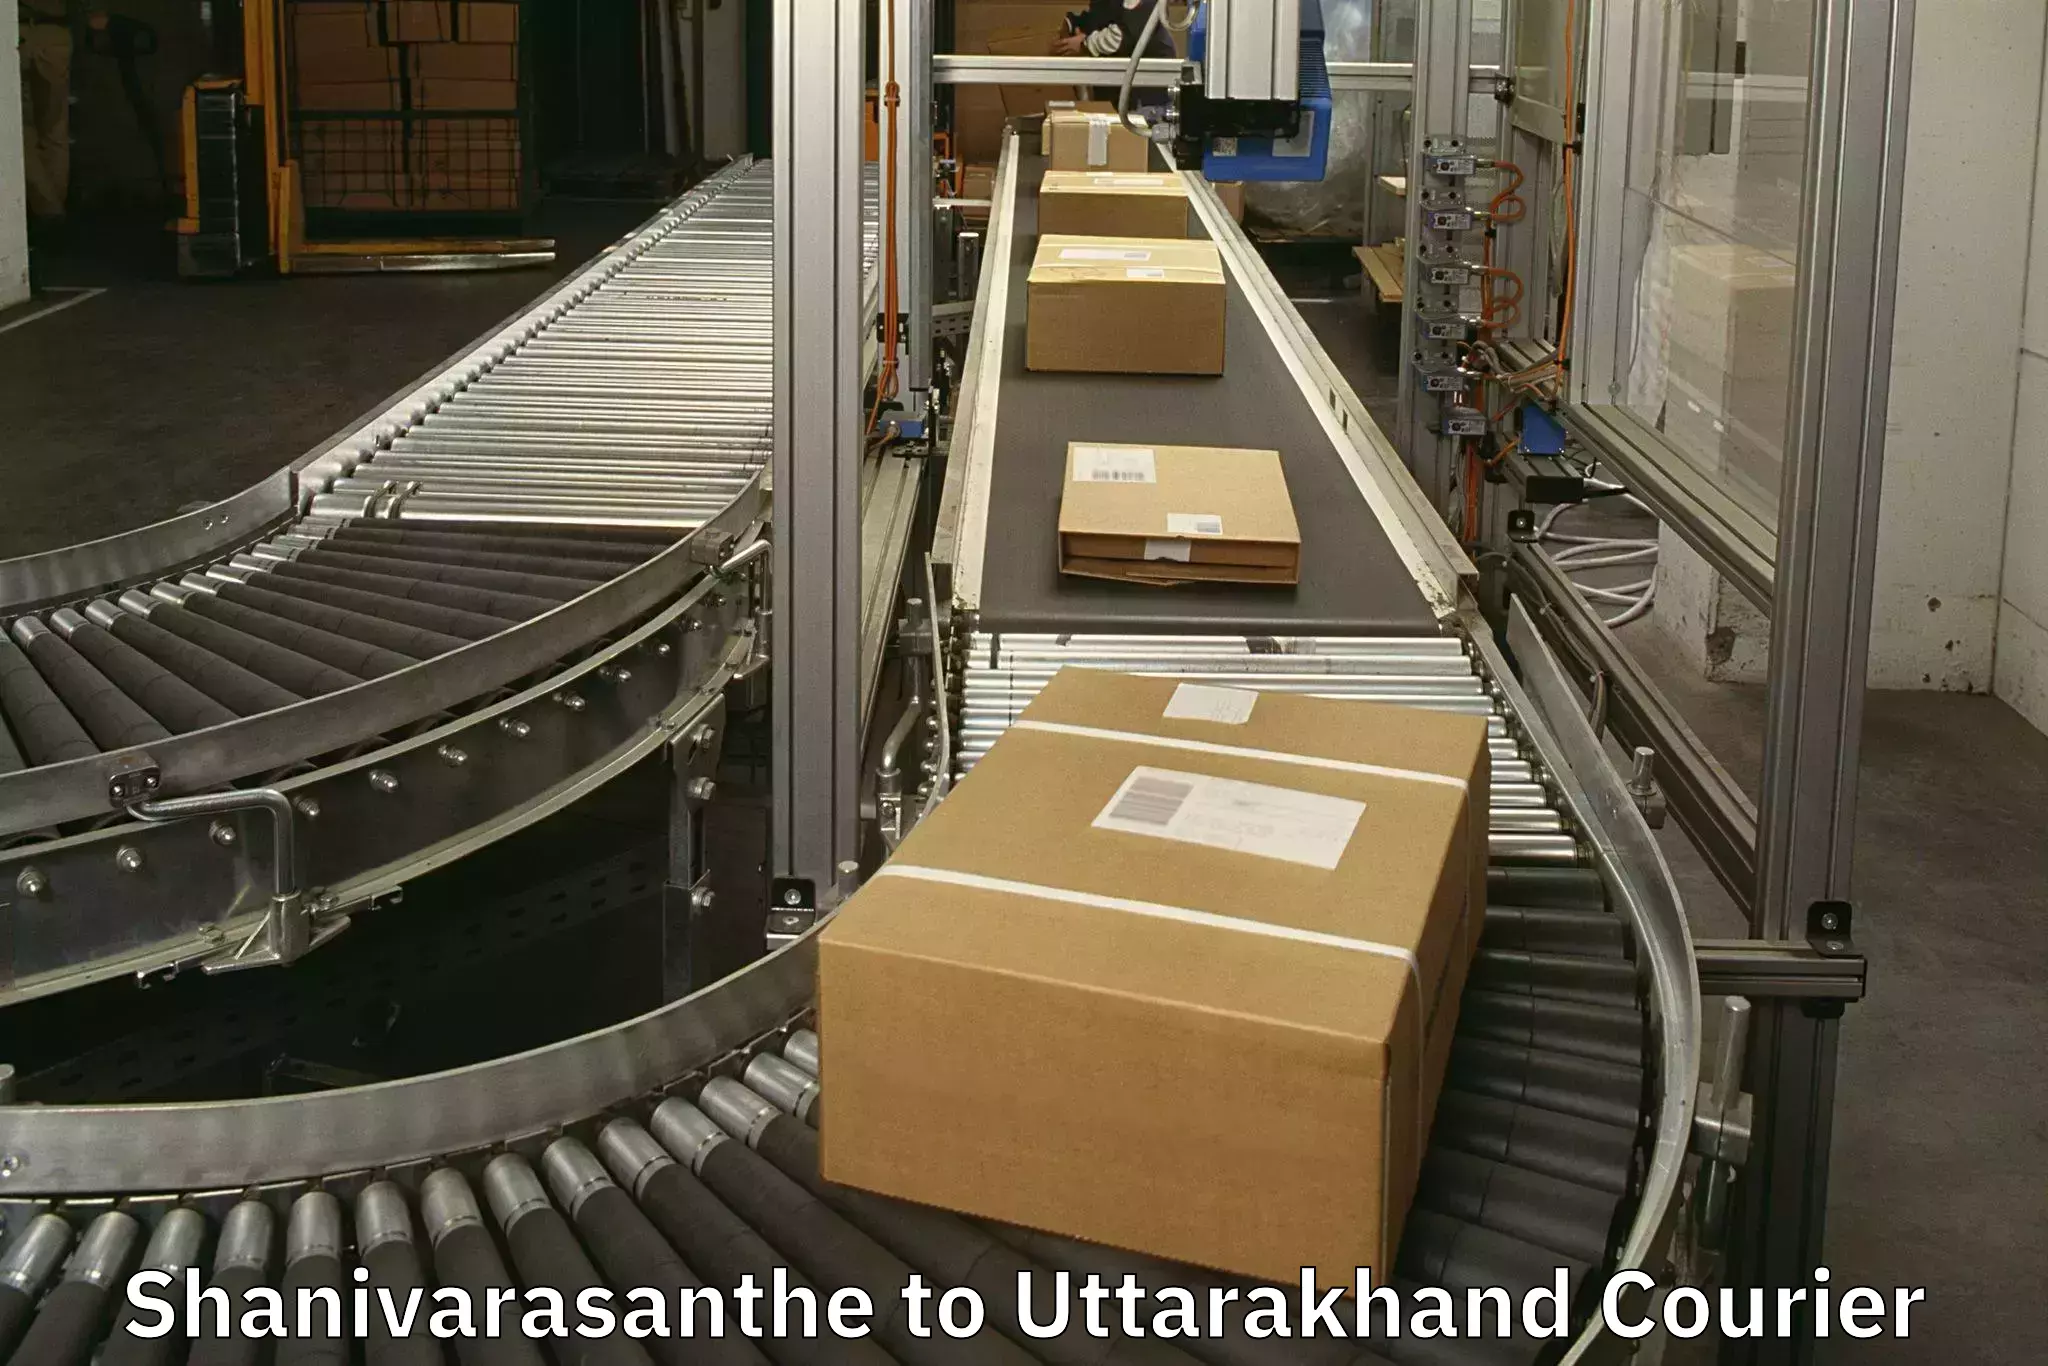 Baggage relocation service Shanivarasanthe to Roorkee